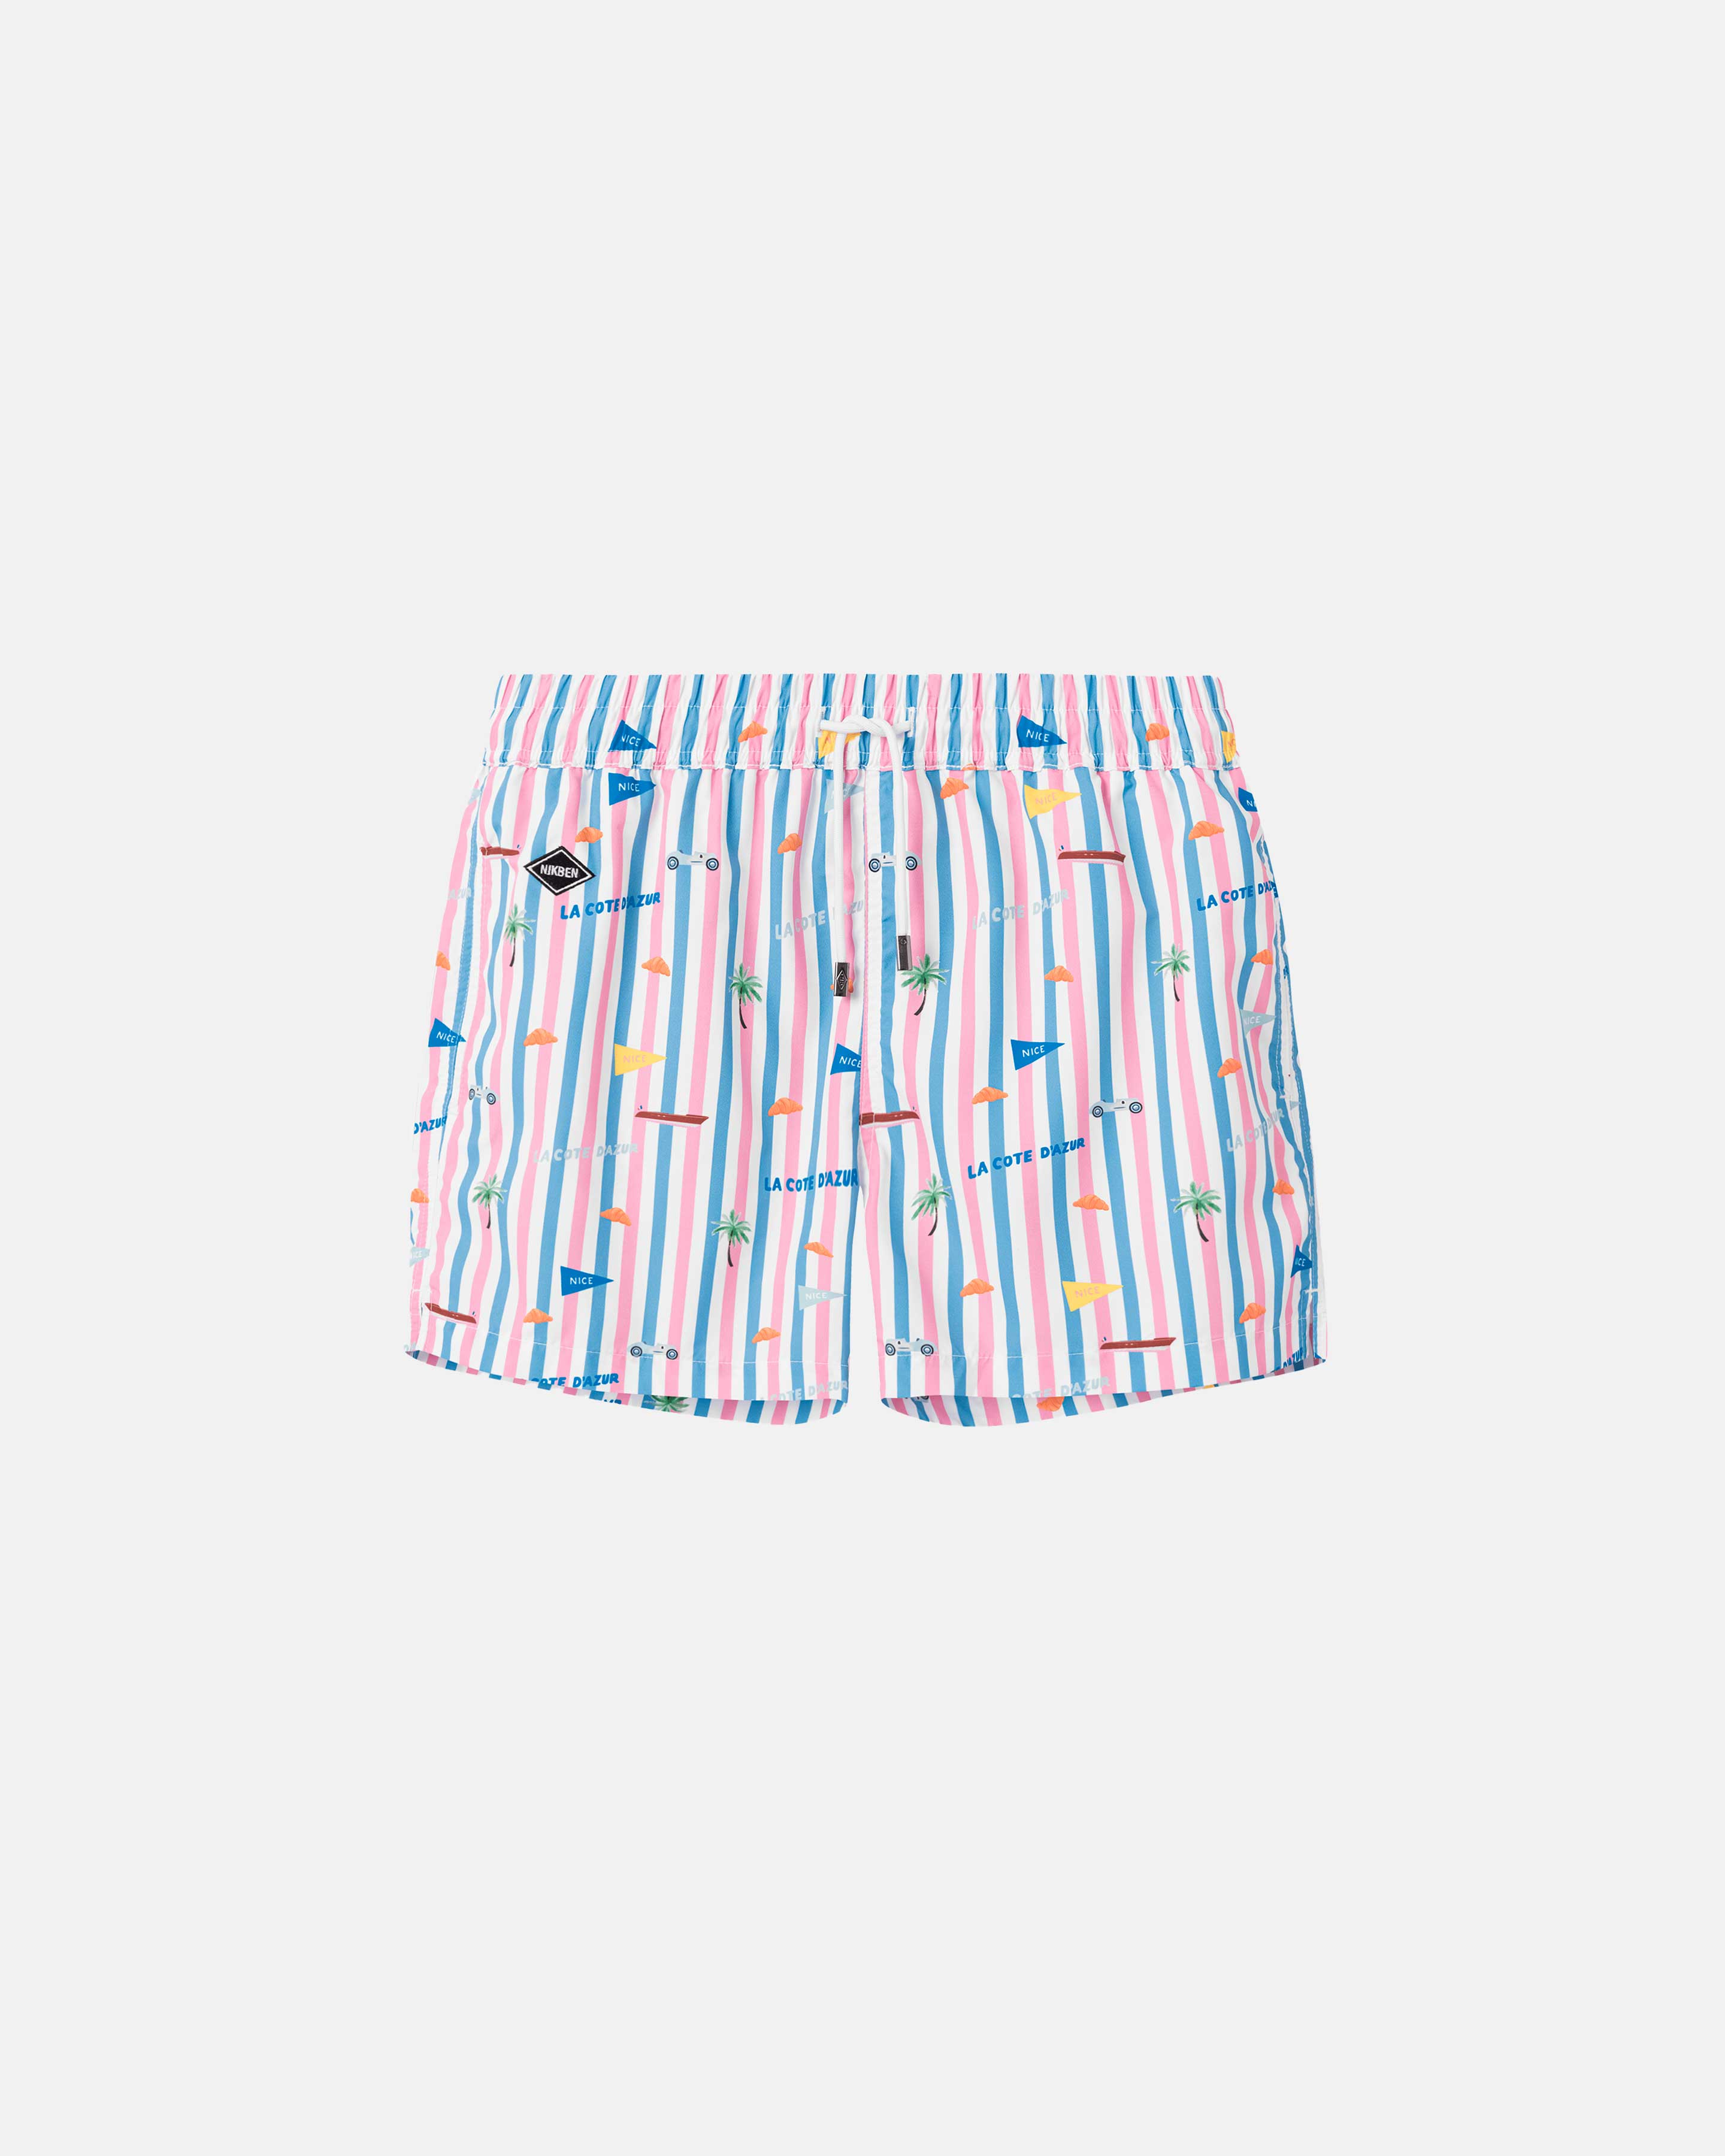 Striped printed swim trunks. Mid length shorts with drawstring waistband and two side pockets.